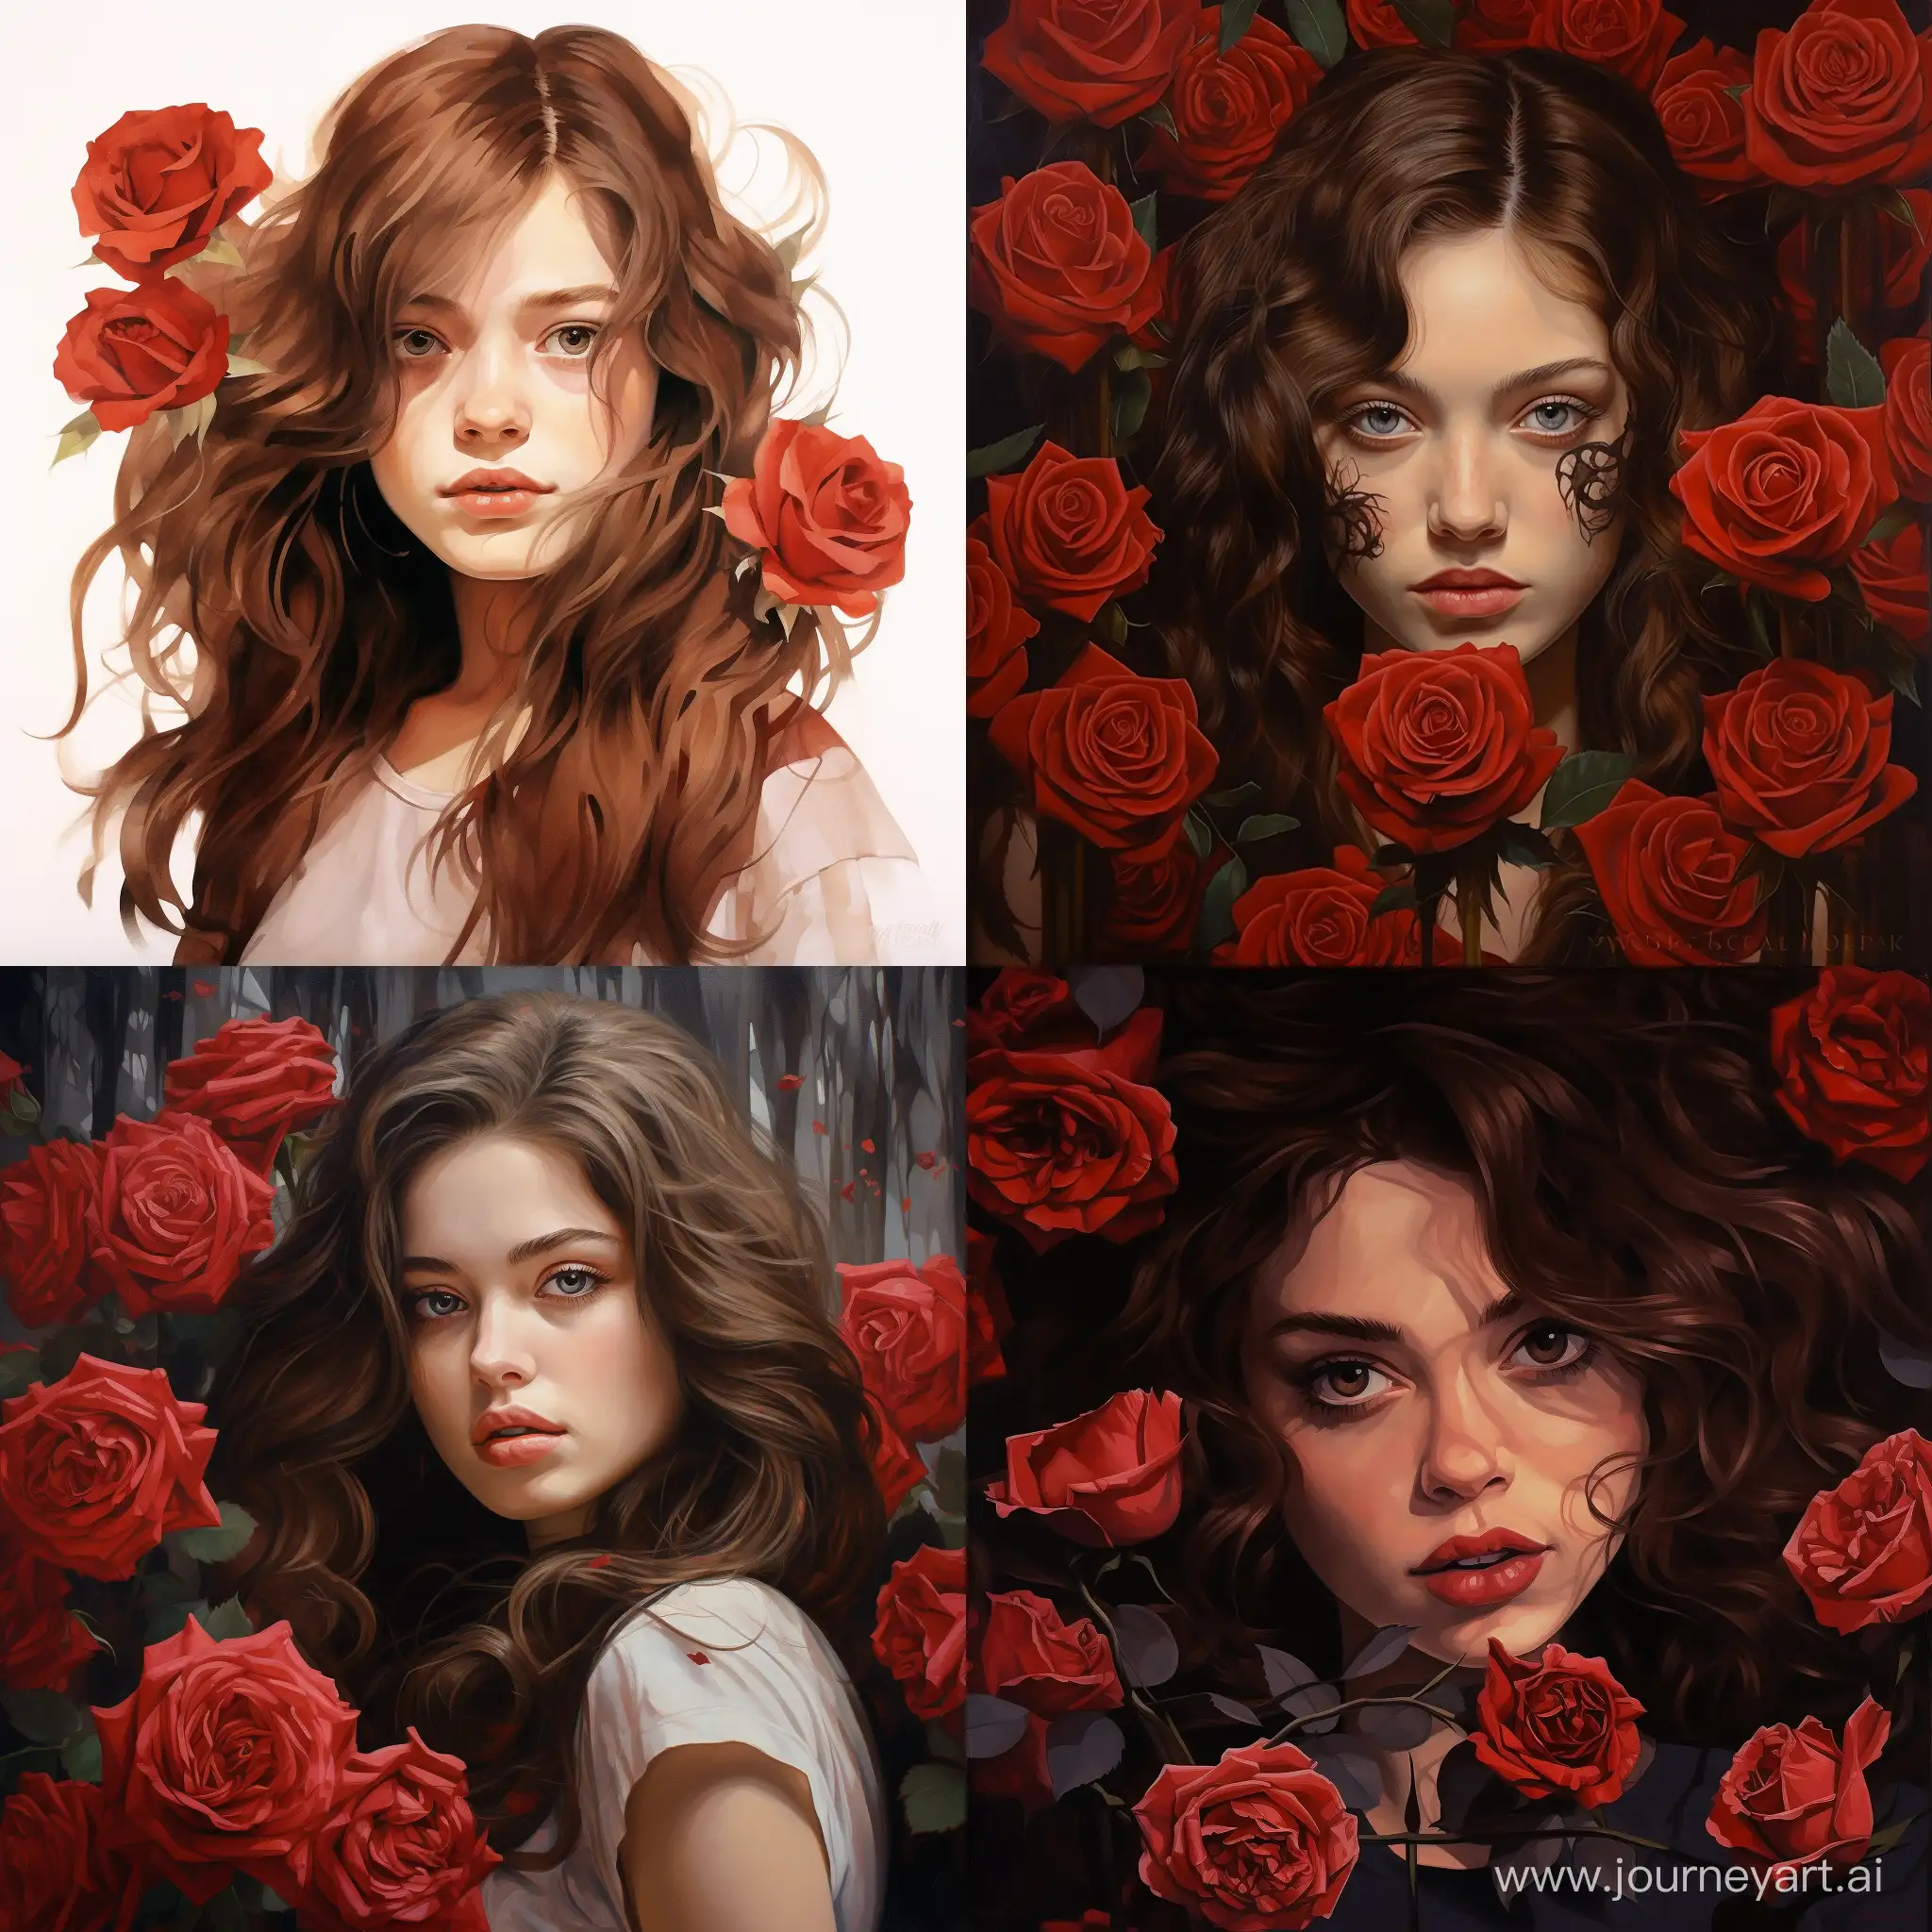 A brown haired girl with hazel eyes and red roses on her face